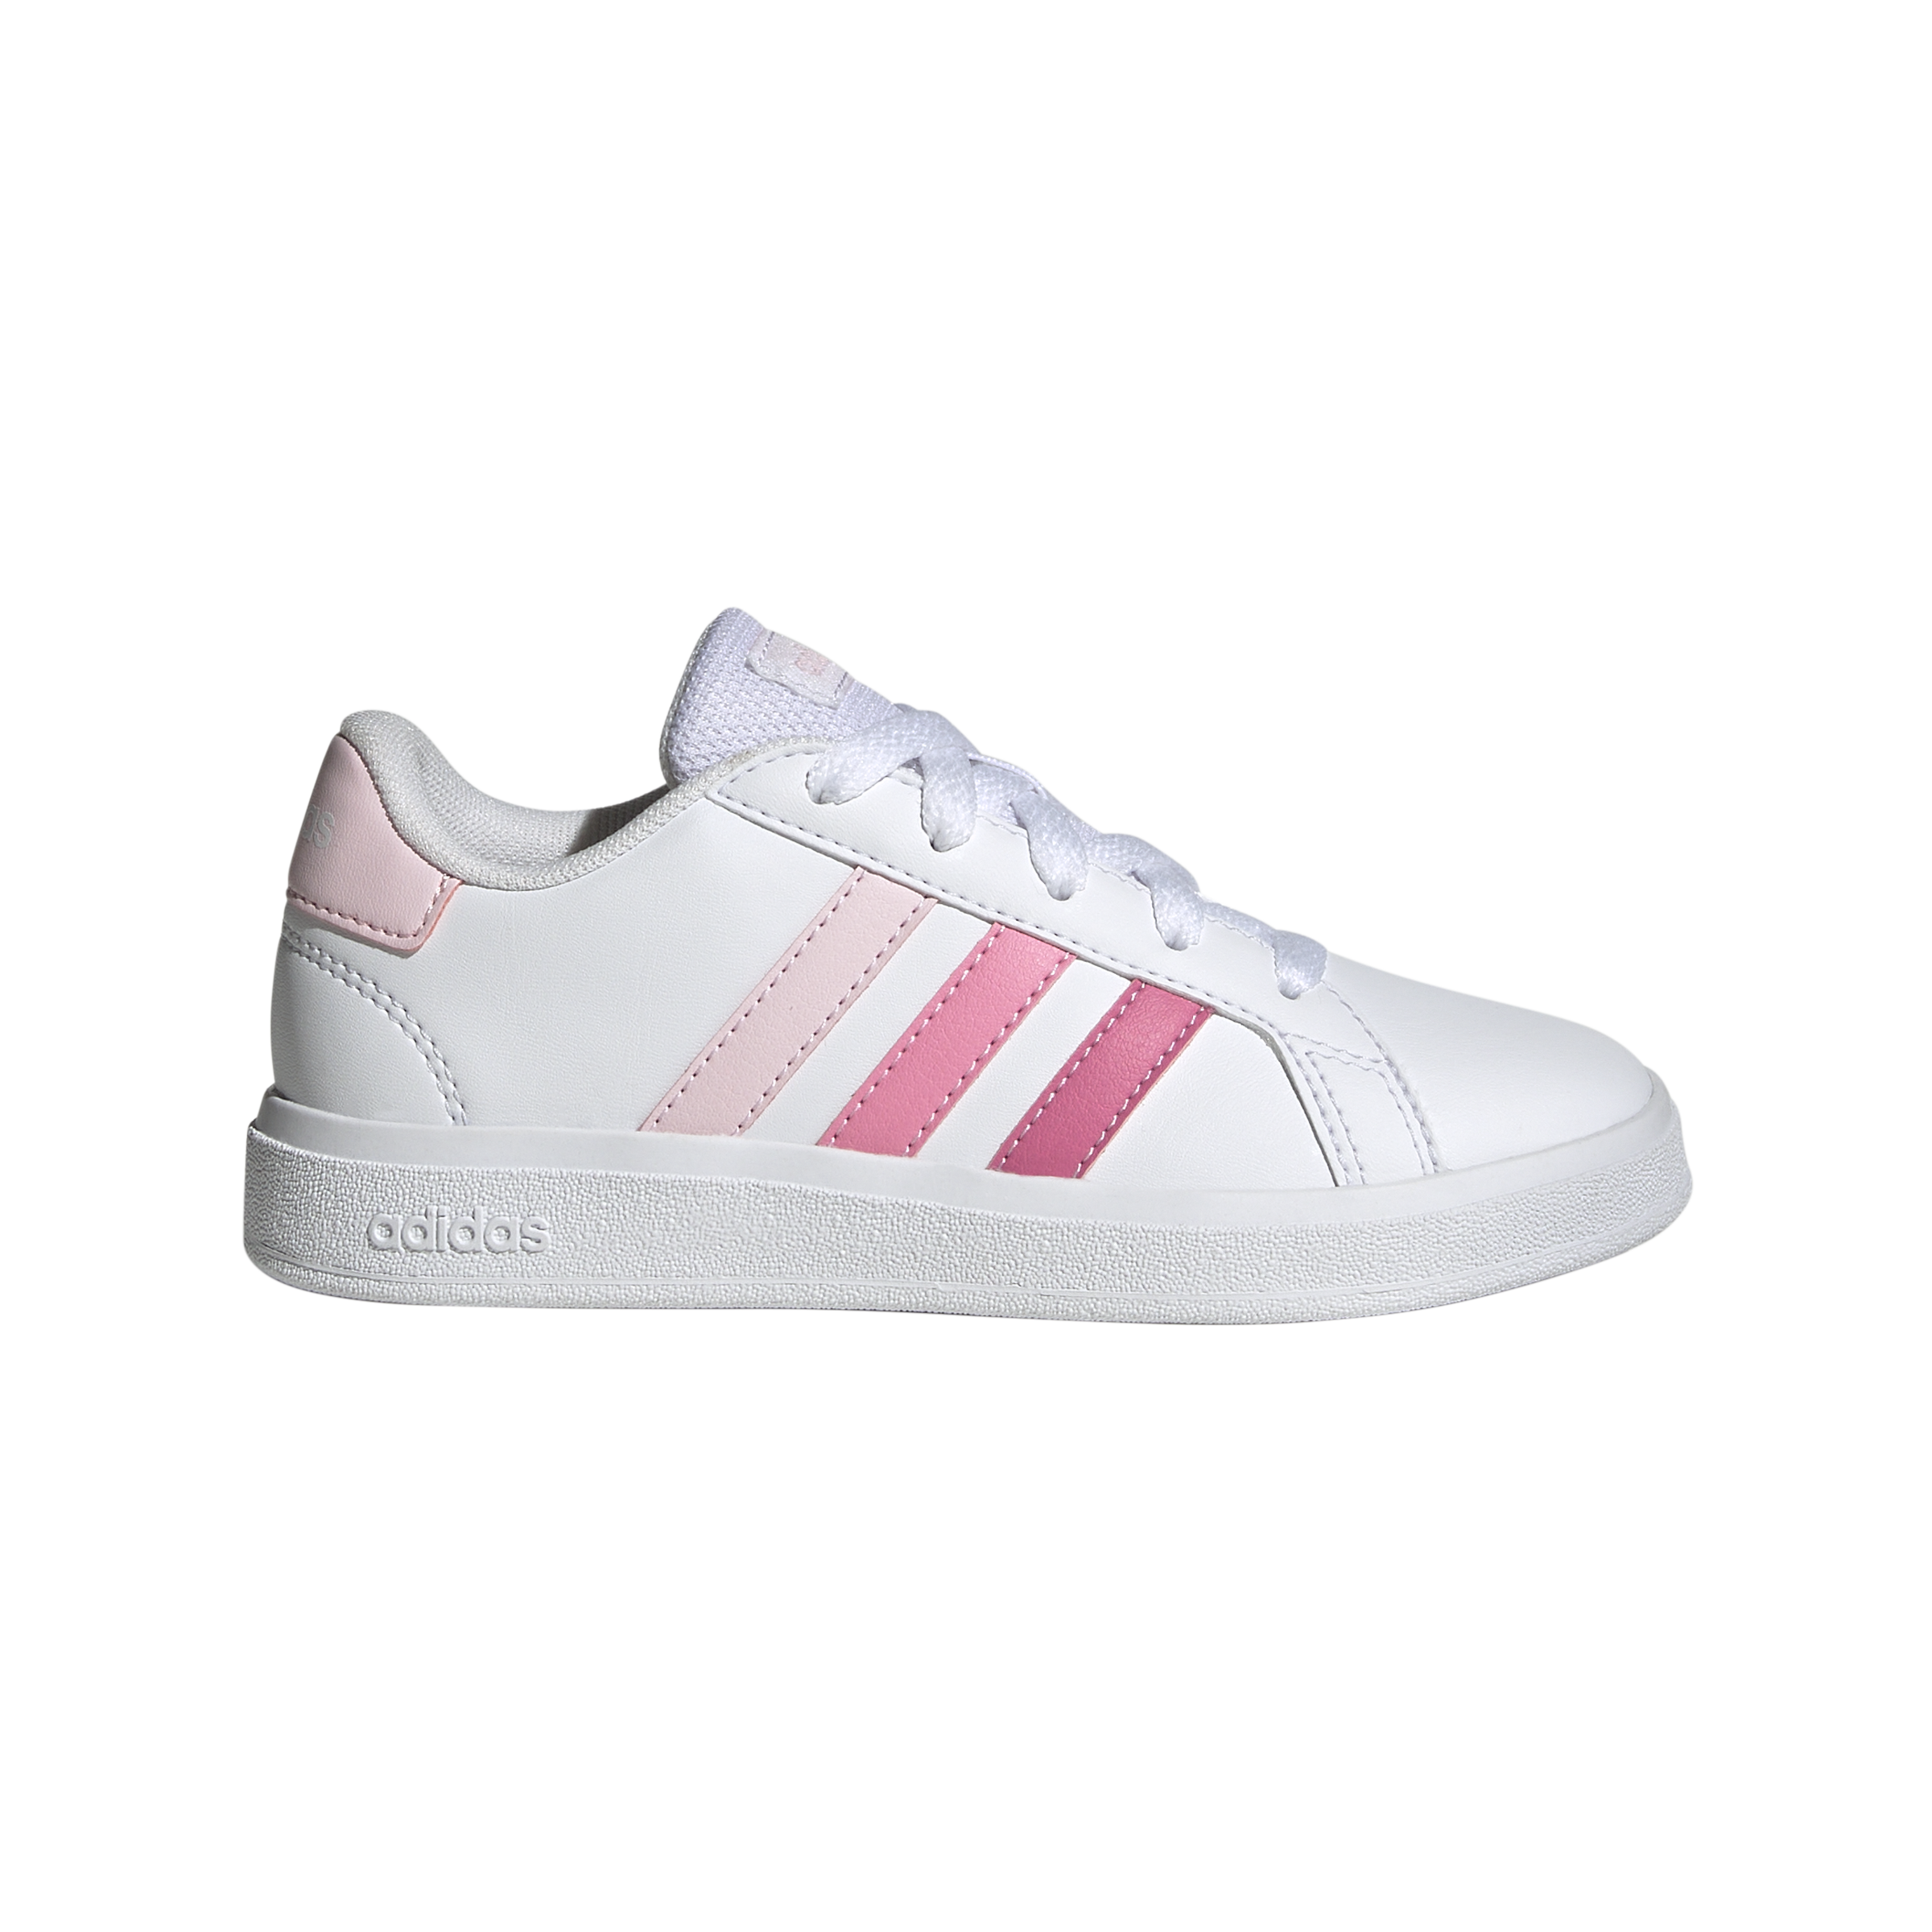 adidas, Girls Grand Court Sneakers, Low Trainers